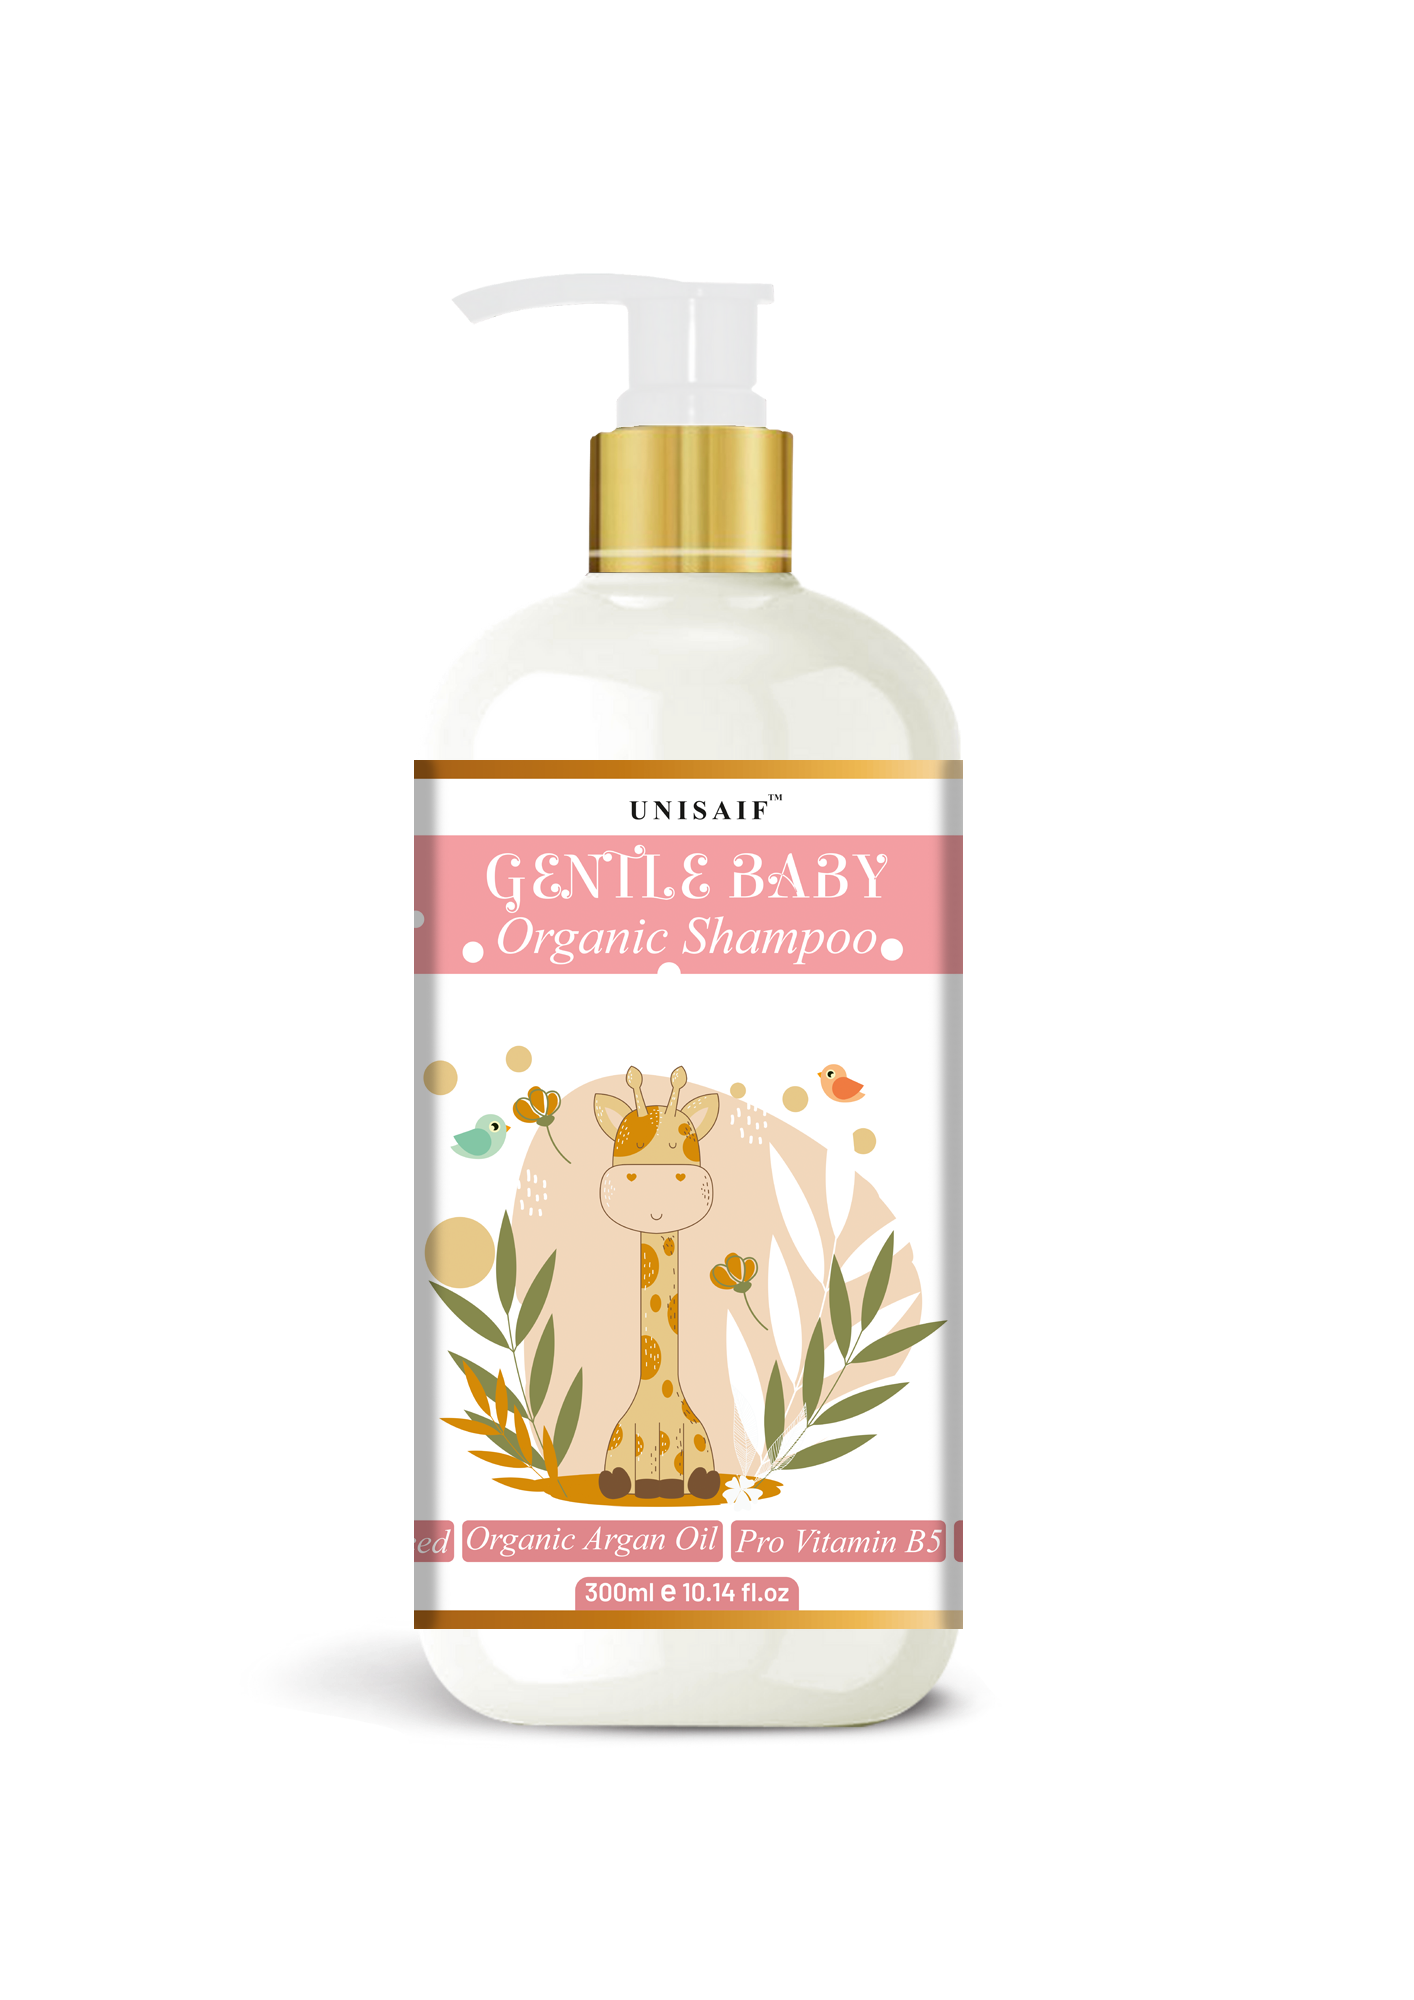 Gentle Baby Organic Shampoo (300ml) With Pro Vitamin B5 | Gentle Cleansing| No Harsh Chemicals| Tear Free| Optimal PH| NO SULPHATE NO PARABEN